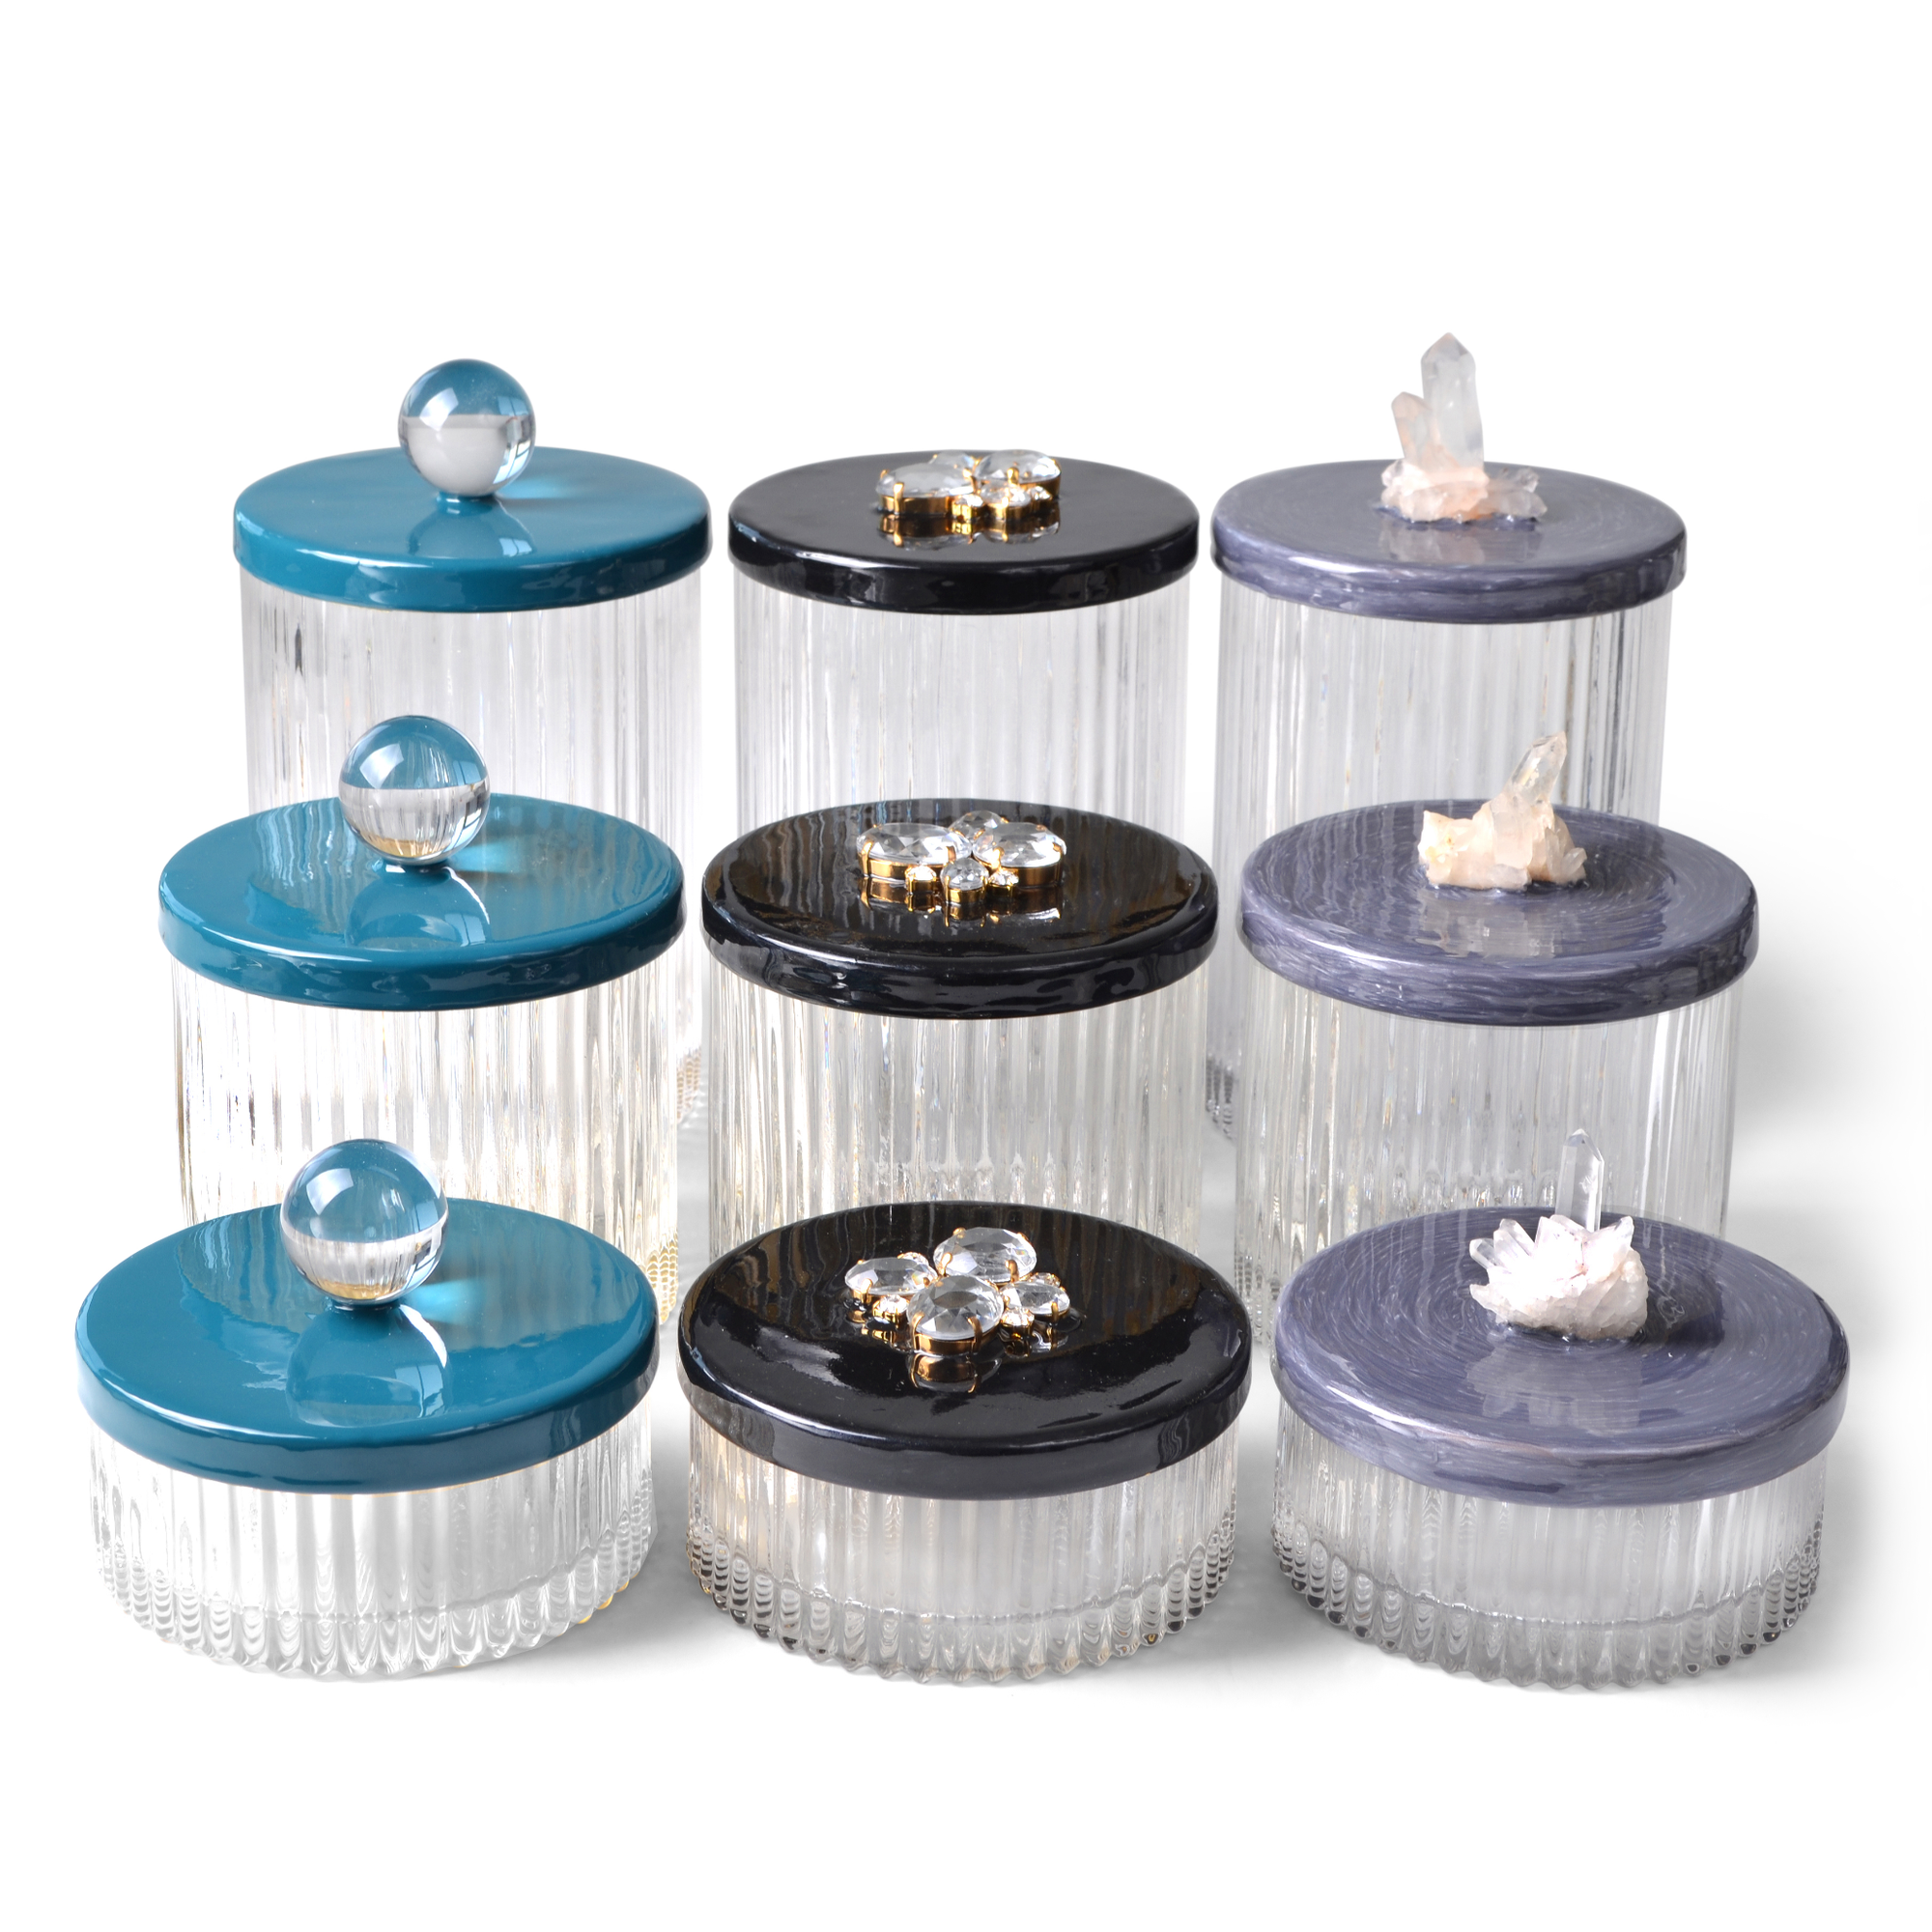 3 Sets of Mike and Ally Vanity Jars in Different Colors